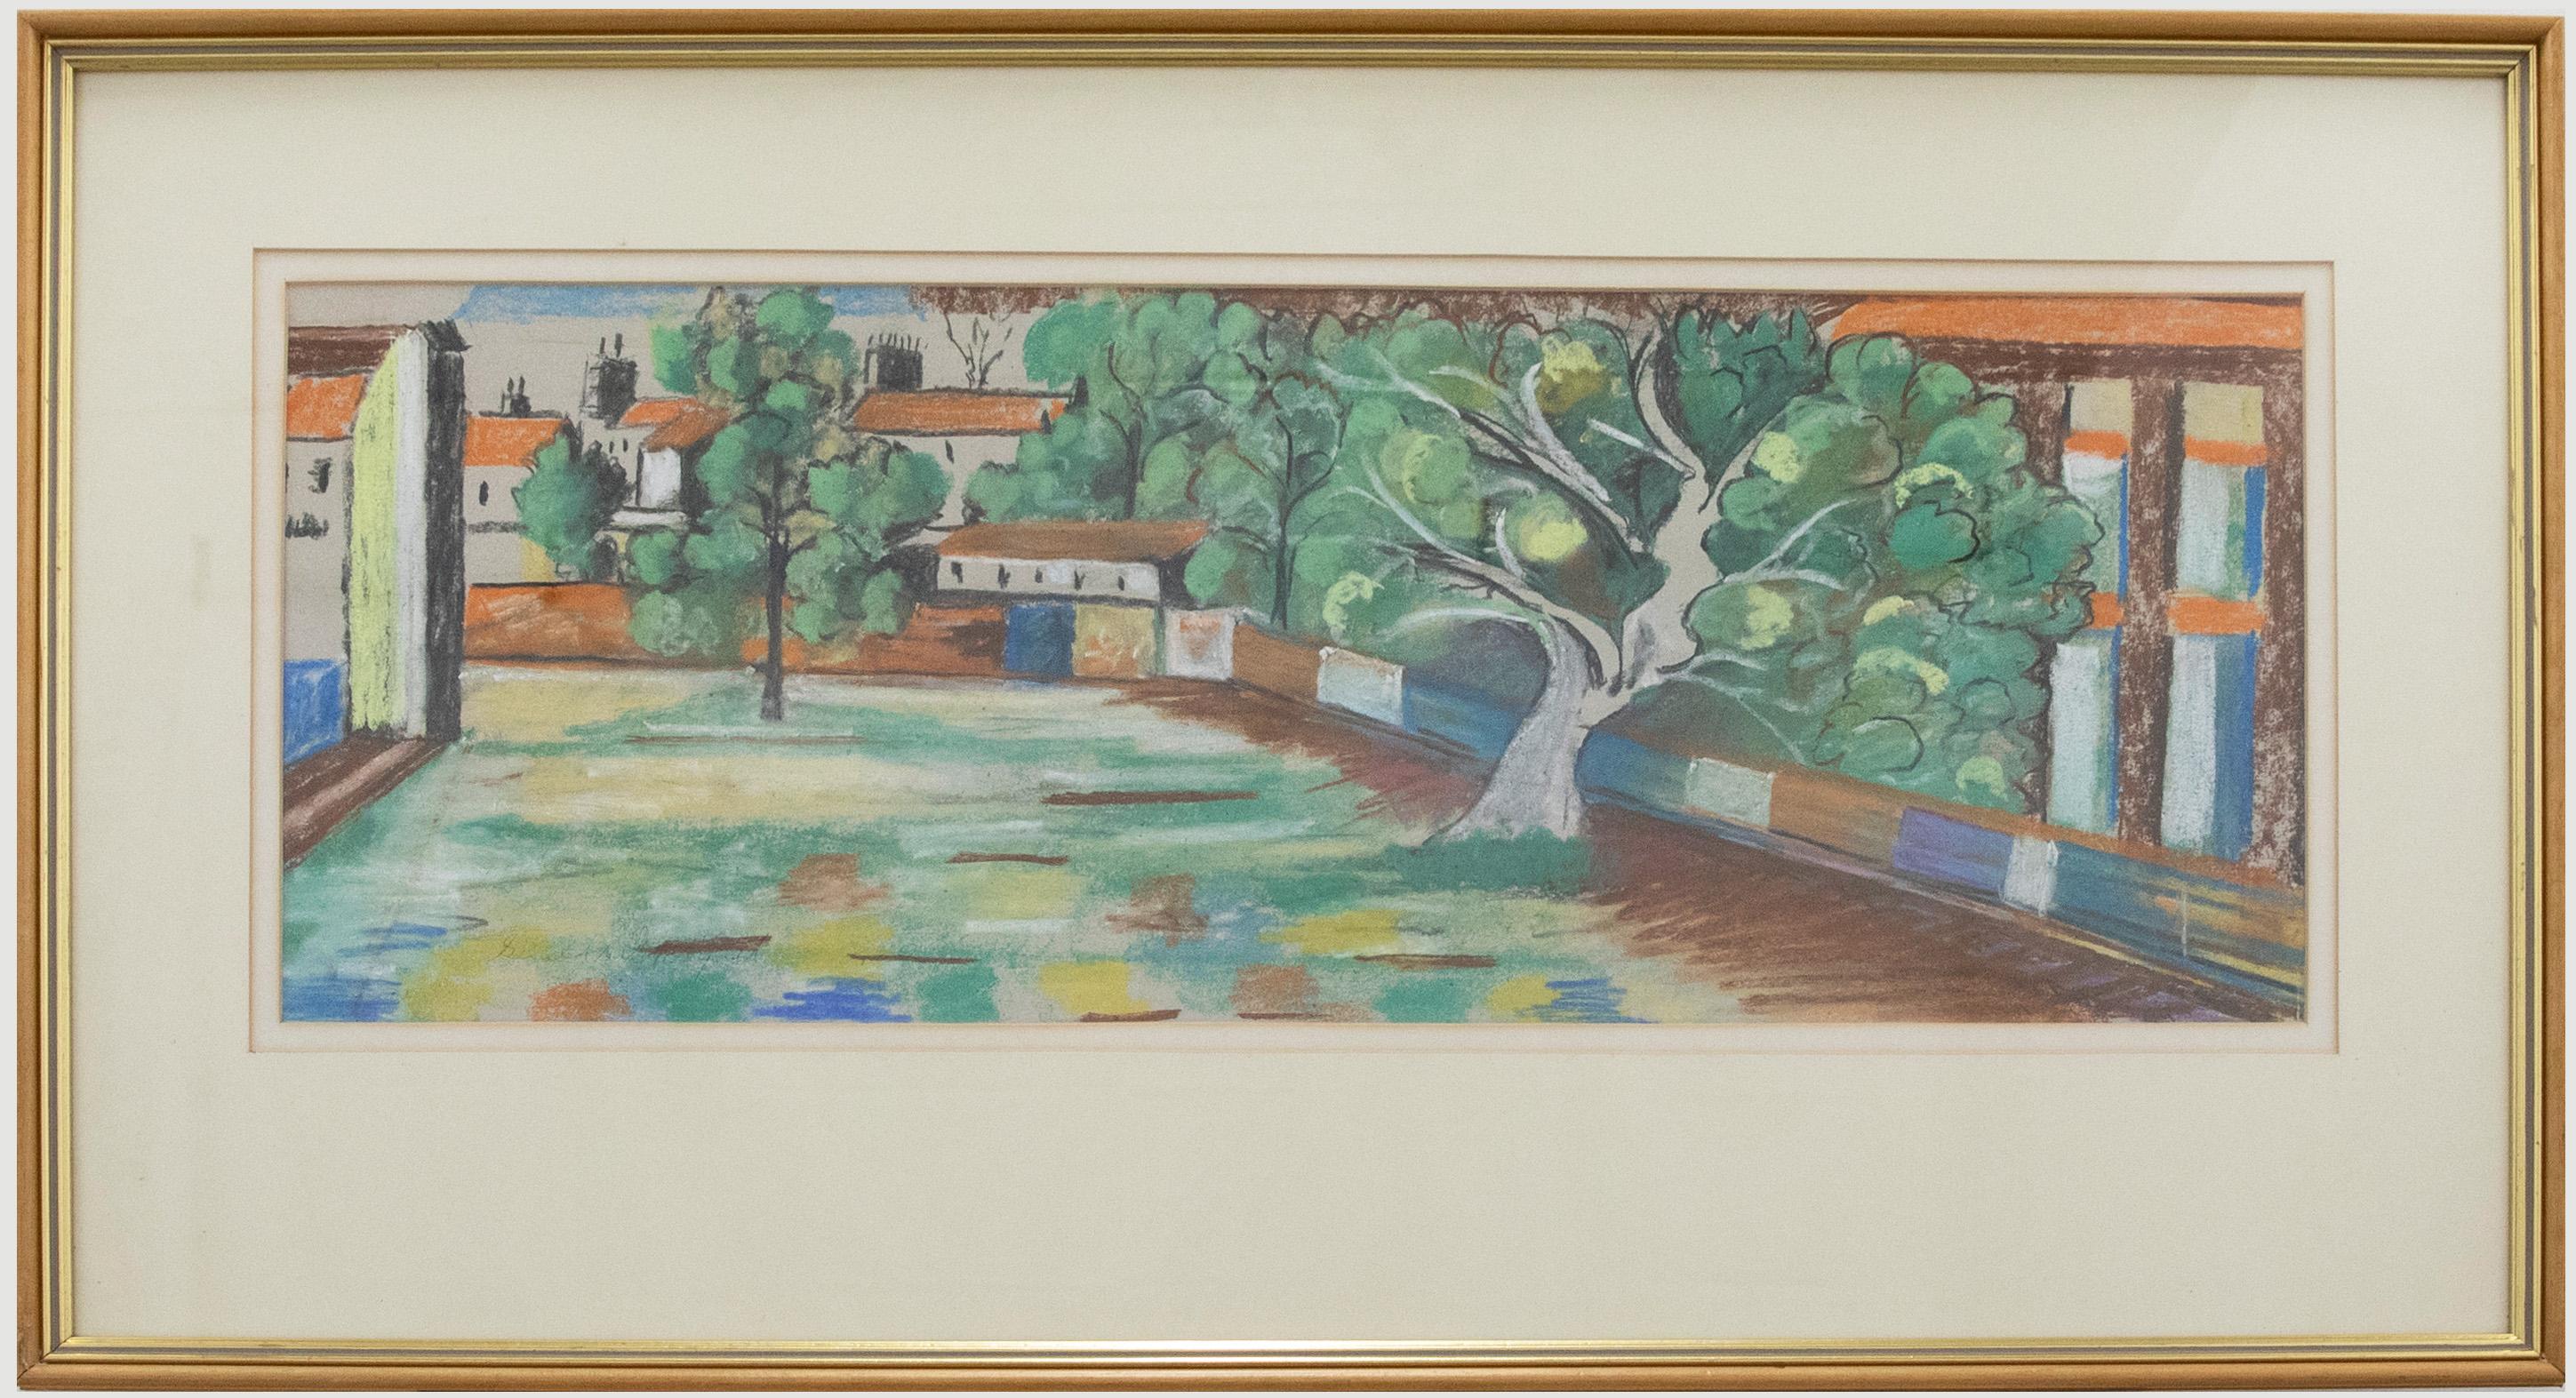 A colourful and eye-catching pastel drawing of a quiet Cul-de-Sac by British artist Gerald Pitchforth. Presented in a long and narrow 20th century frame. Signed.  On paper.